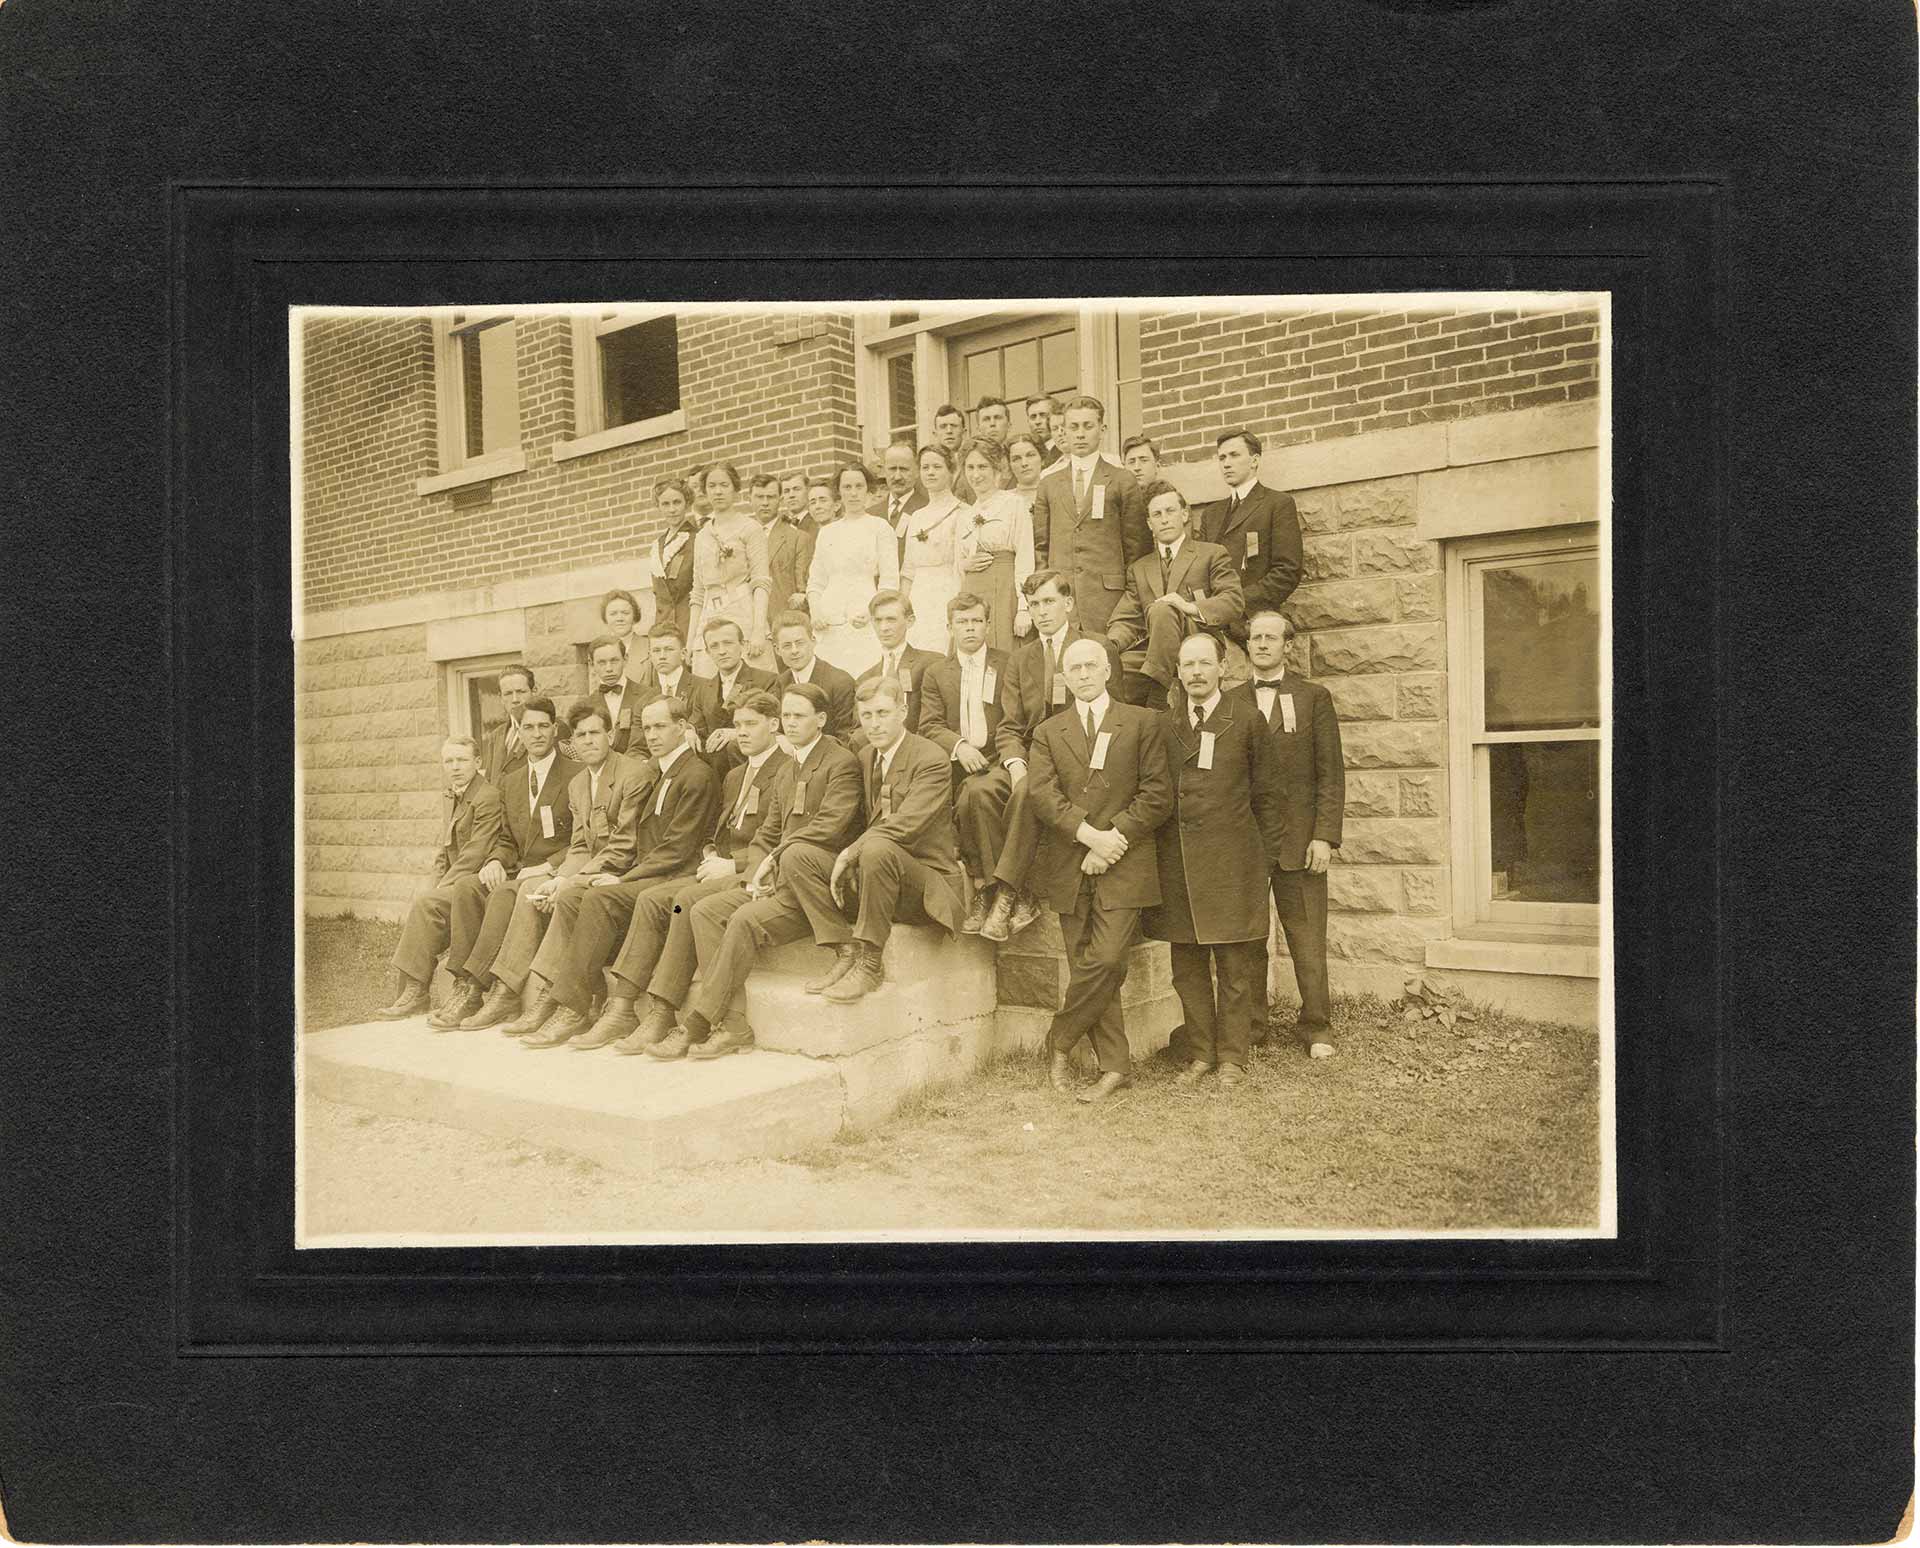 Archival photo showing Melvin Warburton with a group of students and professors.